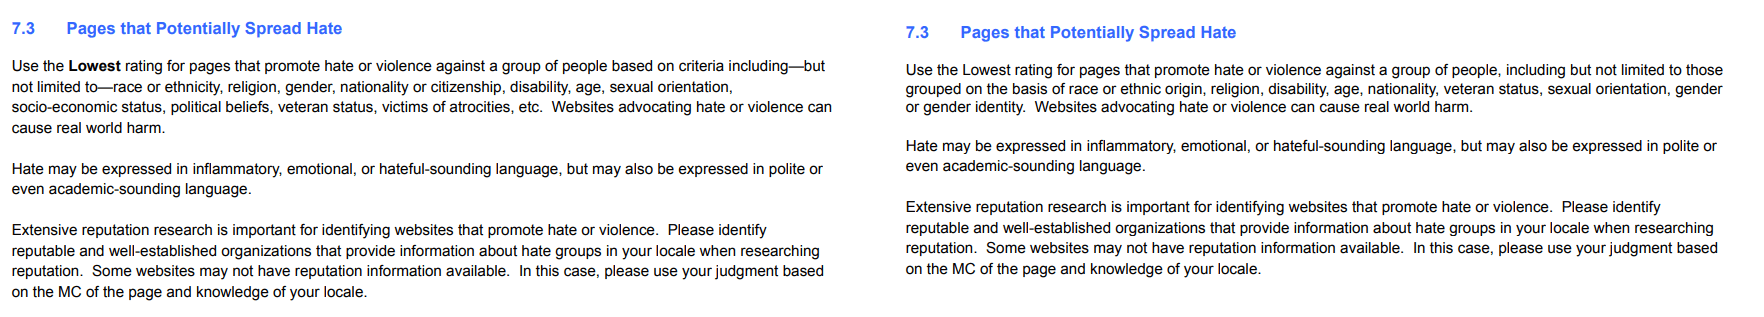 google search quality guidelines pages that promote hate